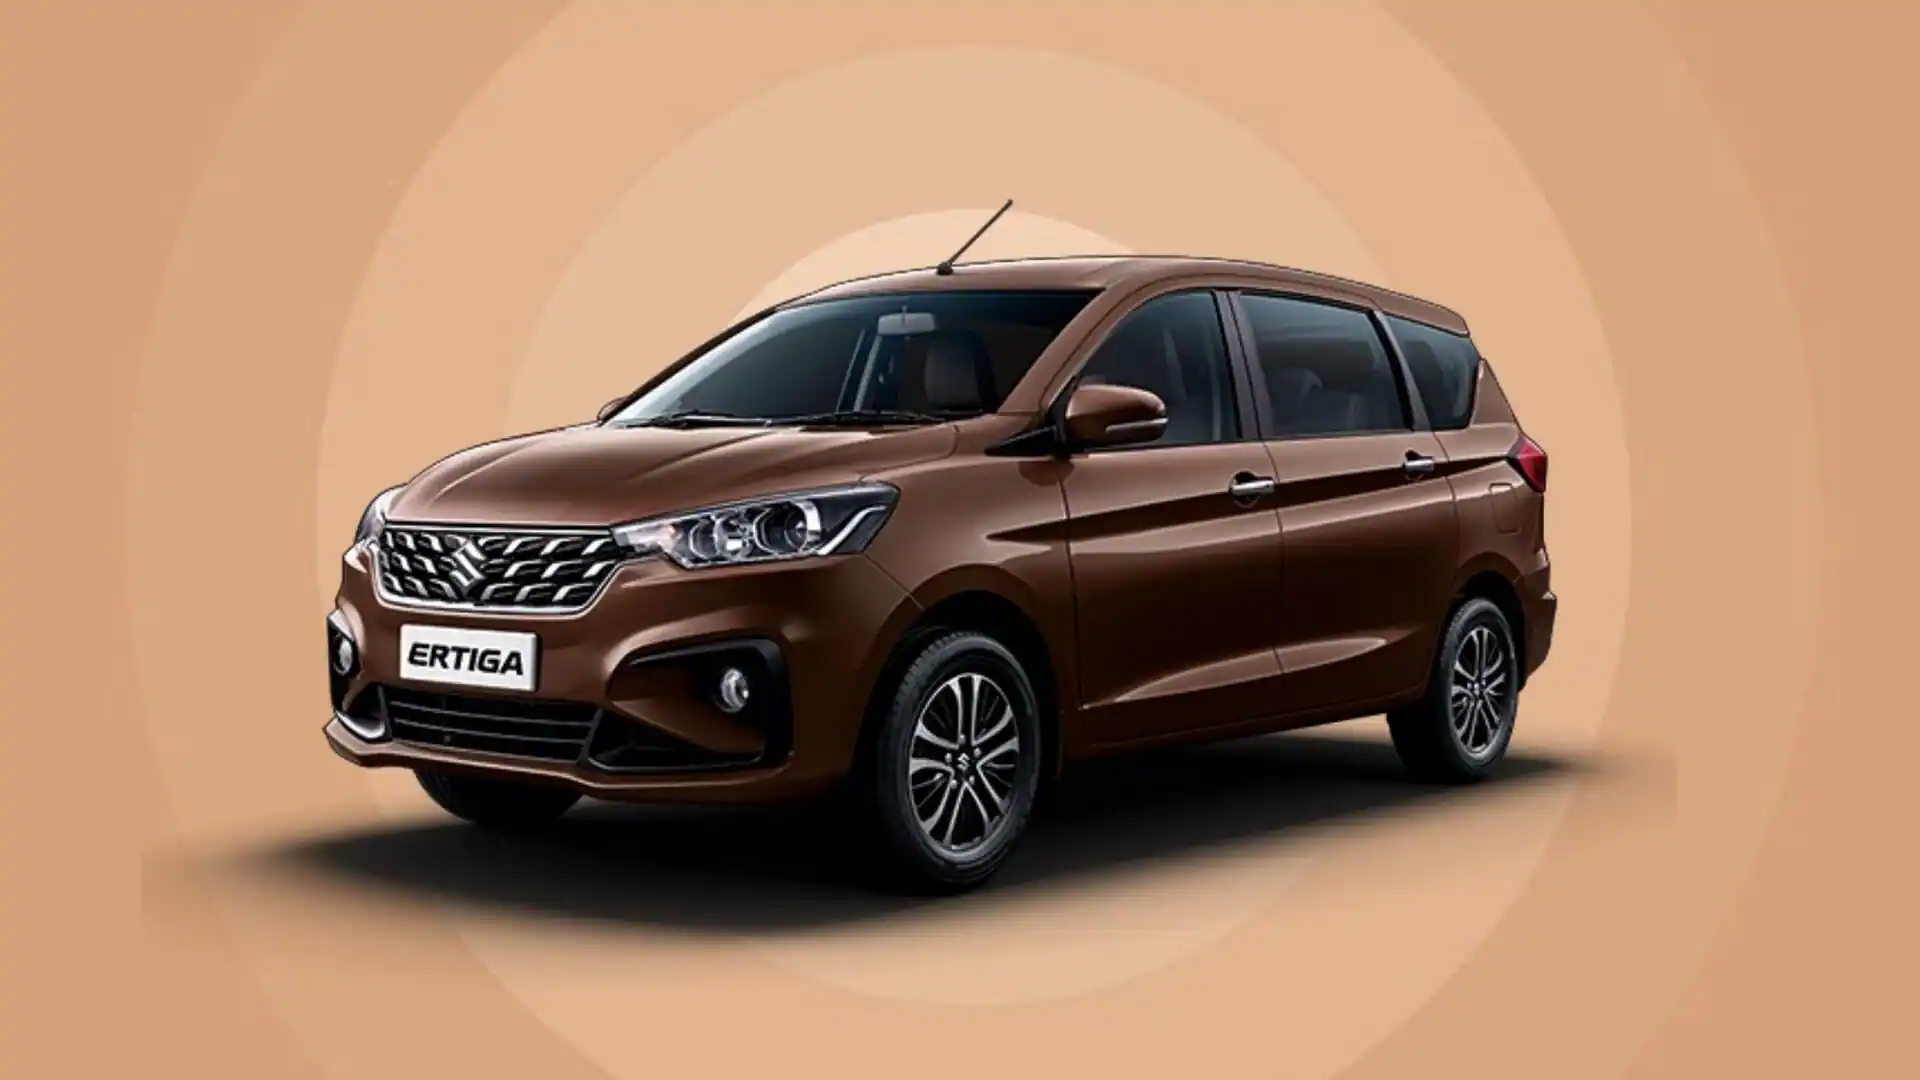 Maruti Ertiga Reaches Milestone of 10 Lakh Units Sold  Achieves Consistent Growth Since Launched